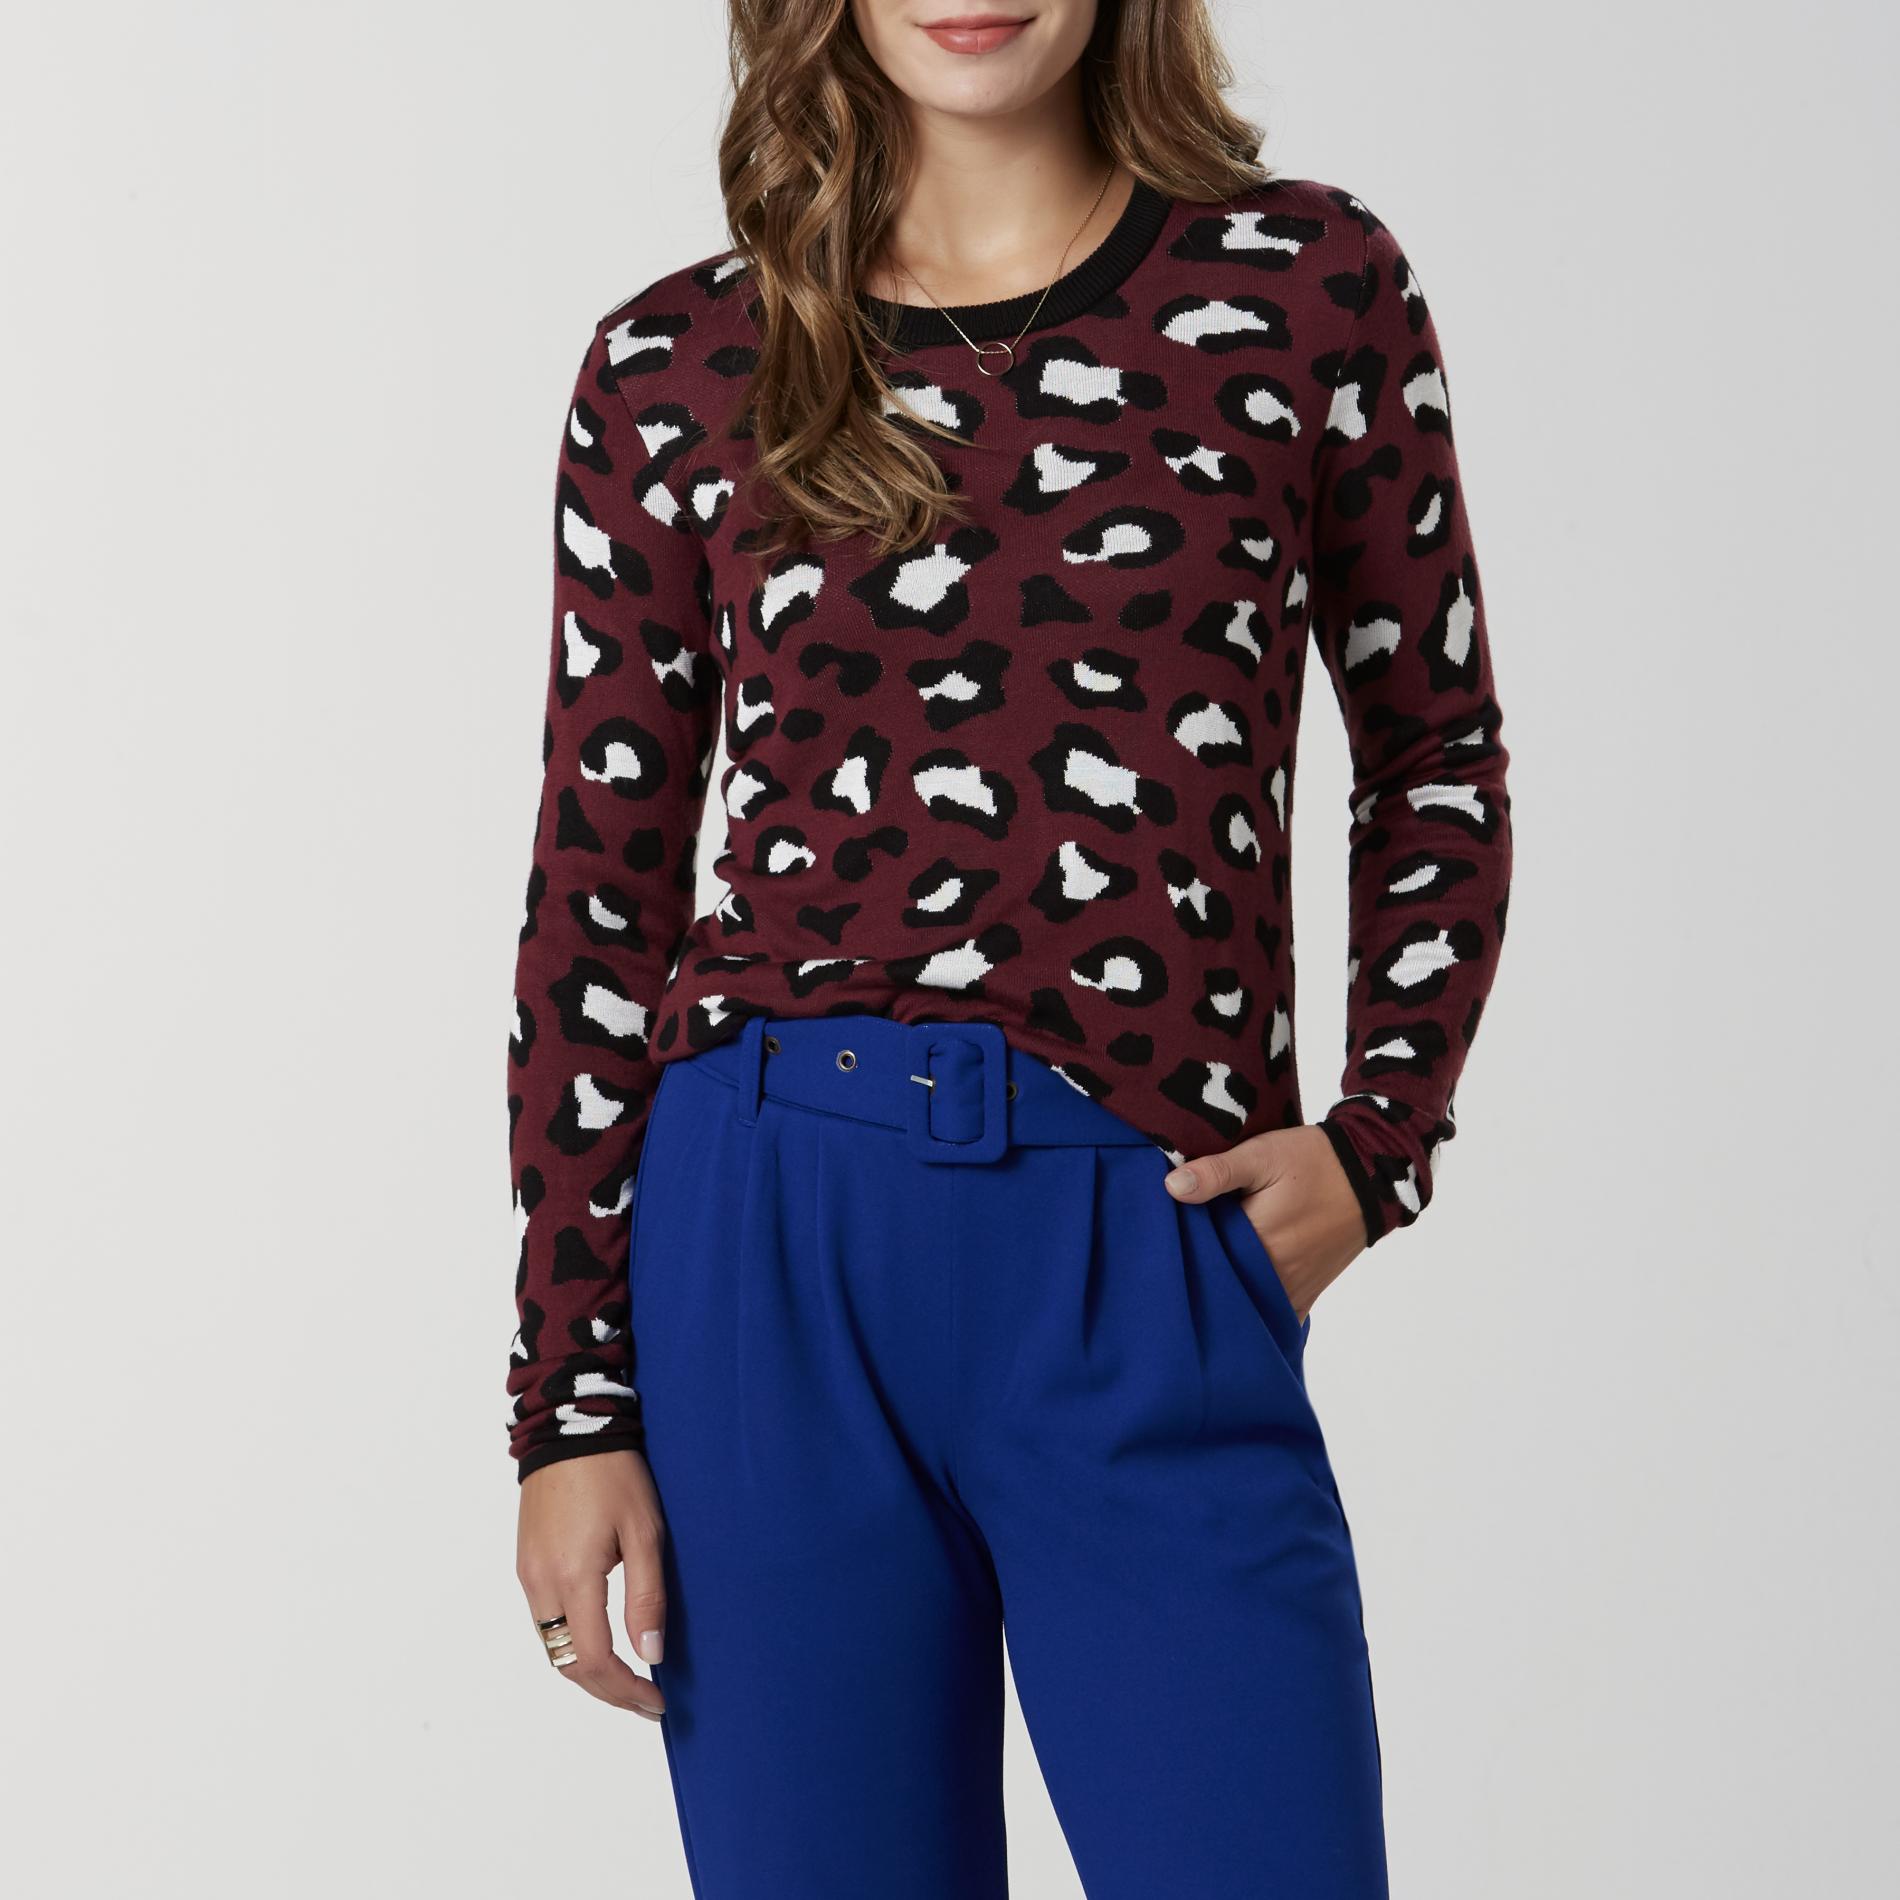 Simply Styled Women's Jacquard Sweater - Leopard